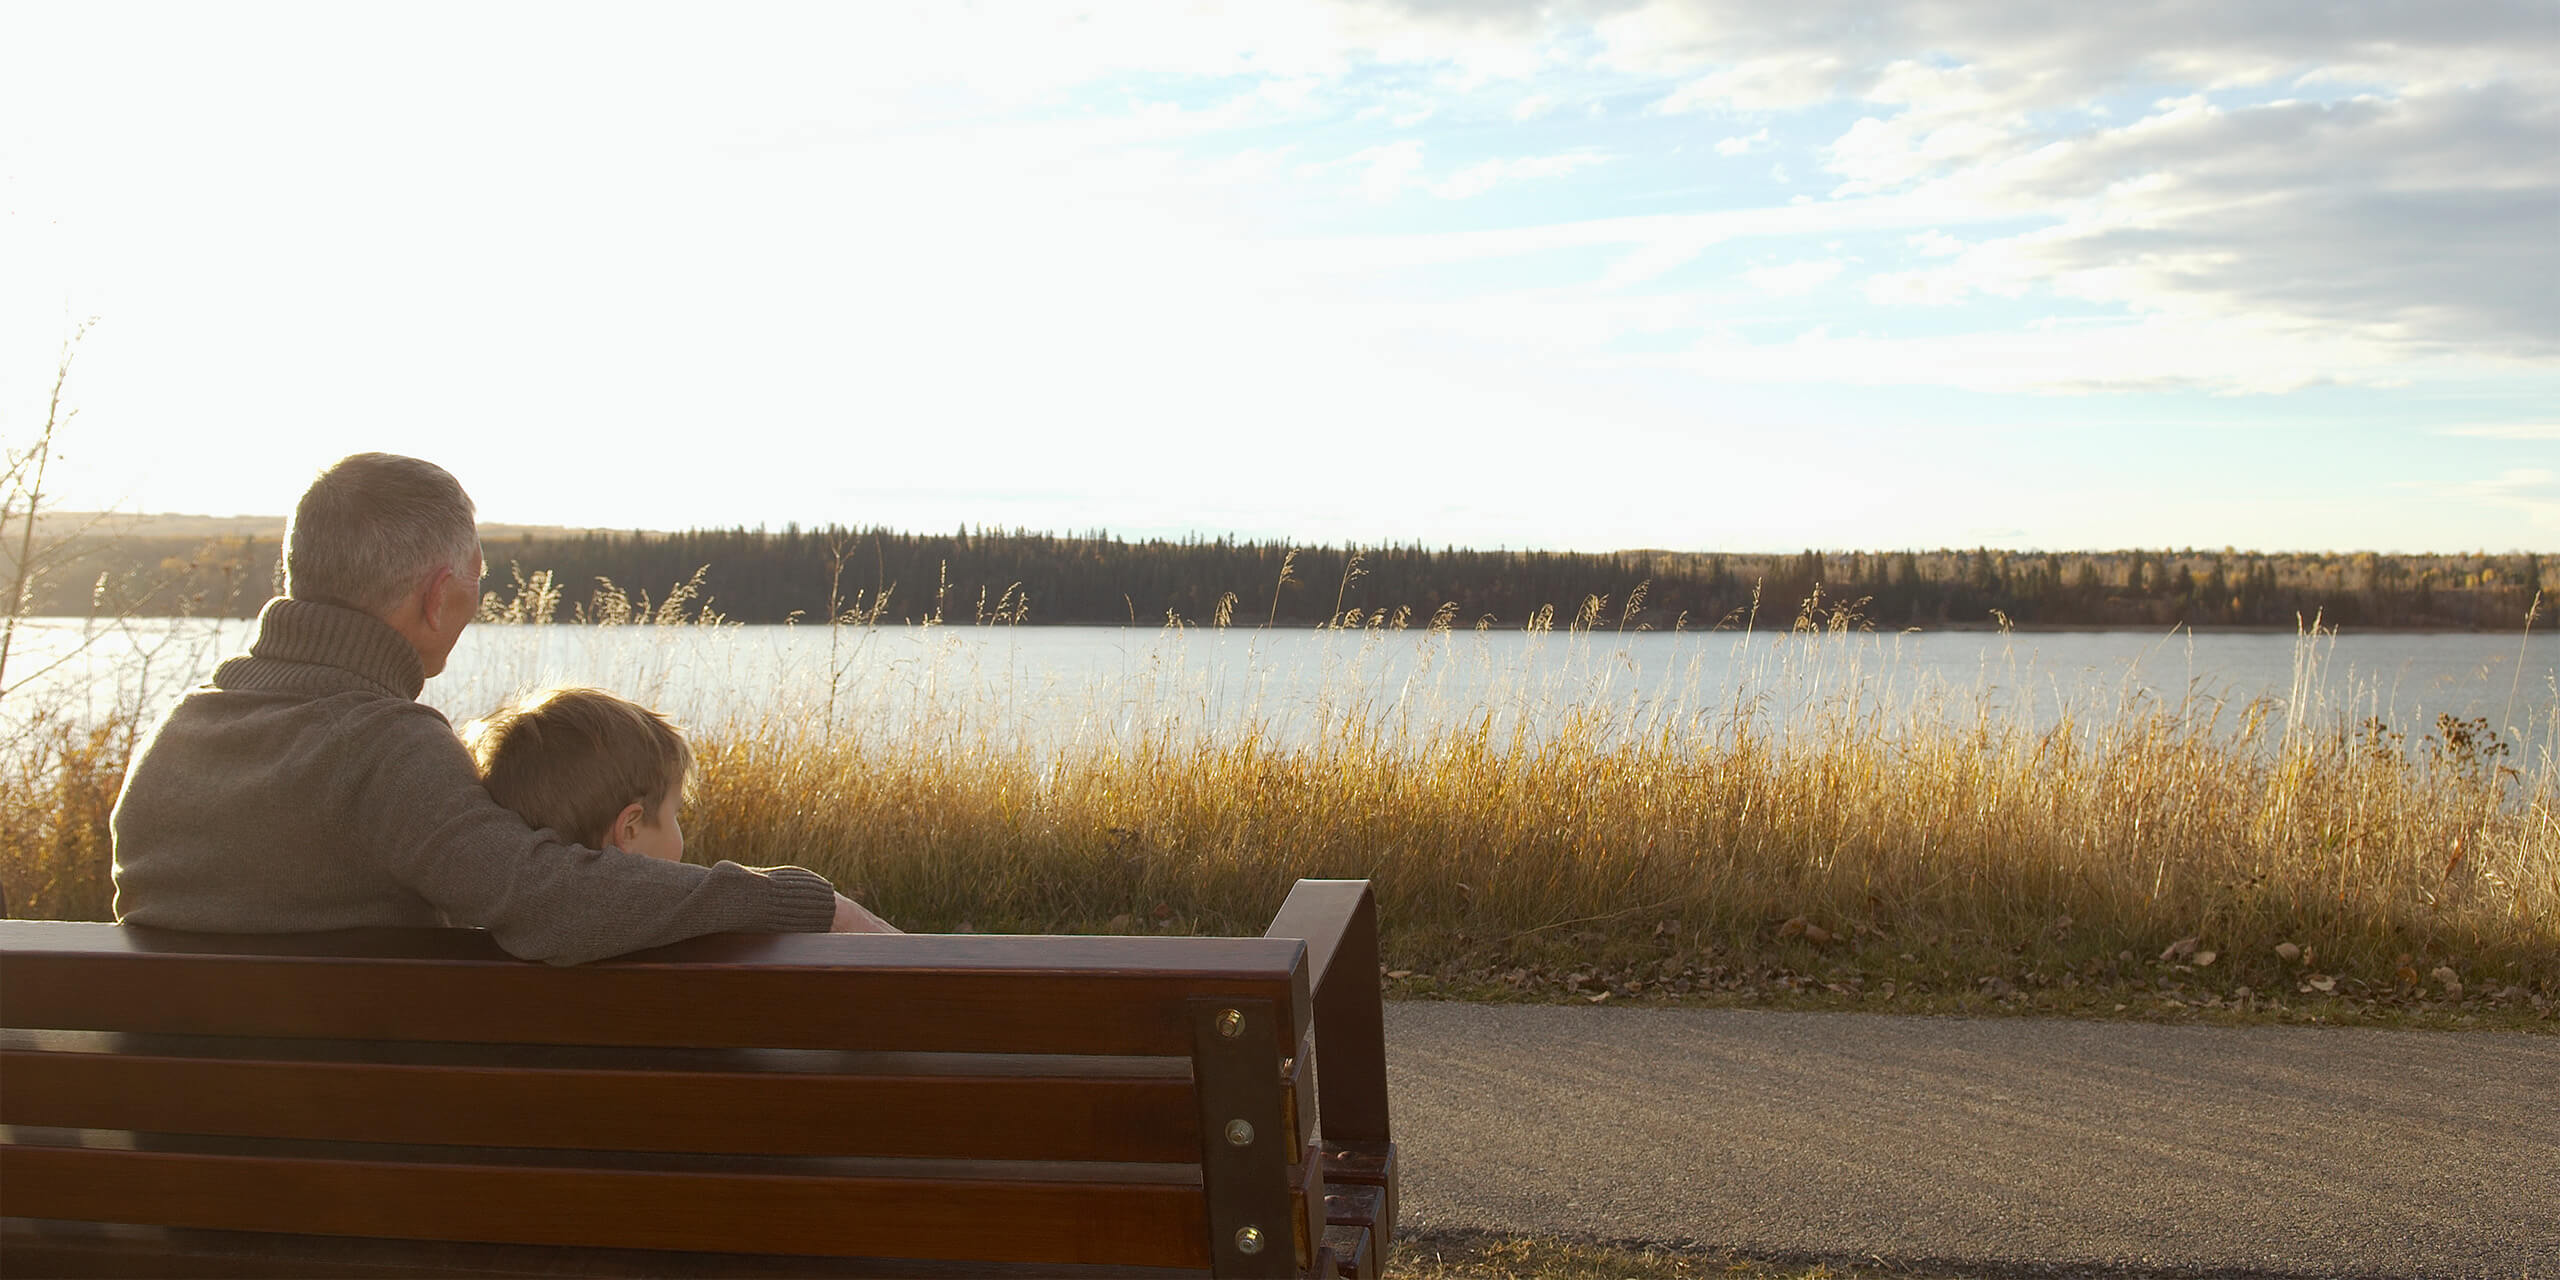 An older man and a young boy on a park bench looking out at a lake